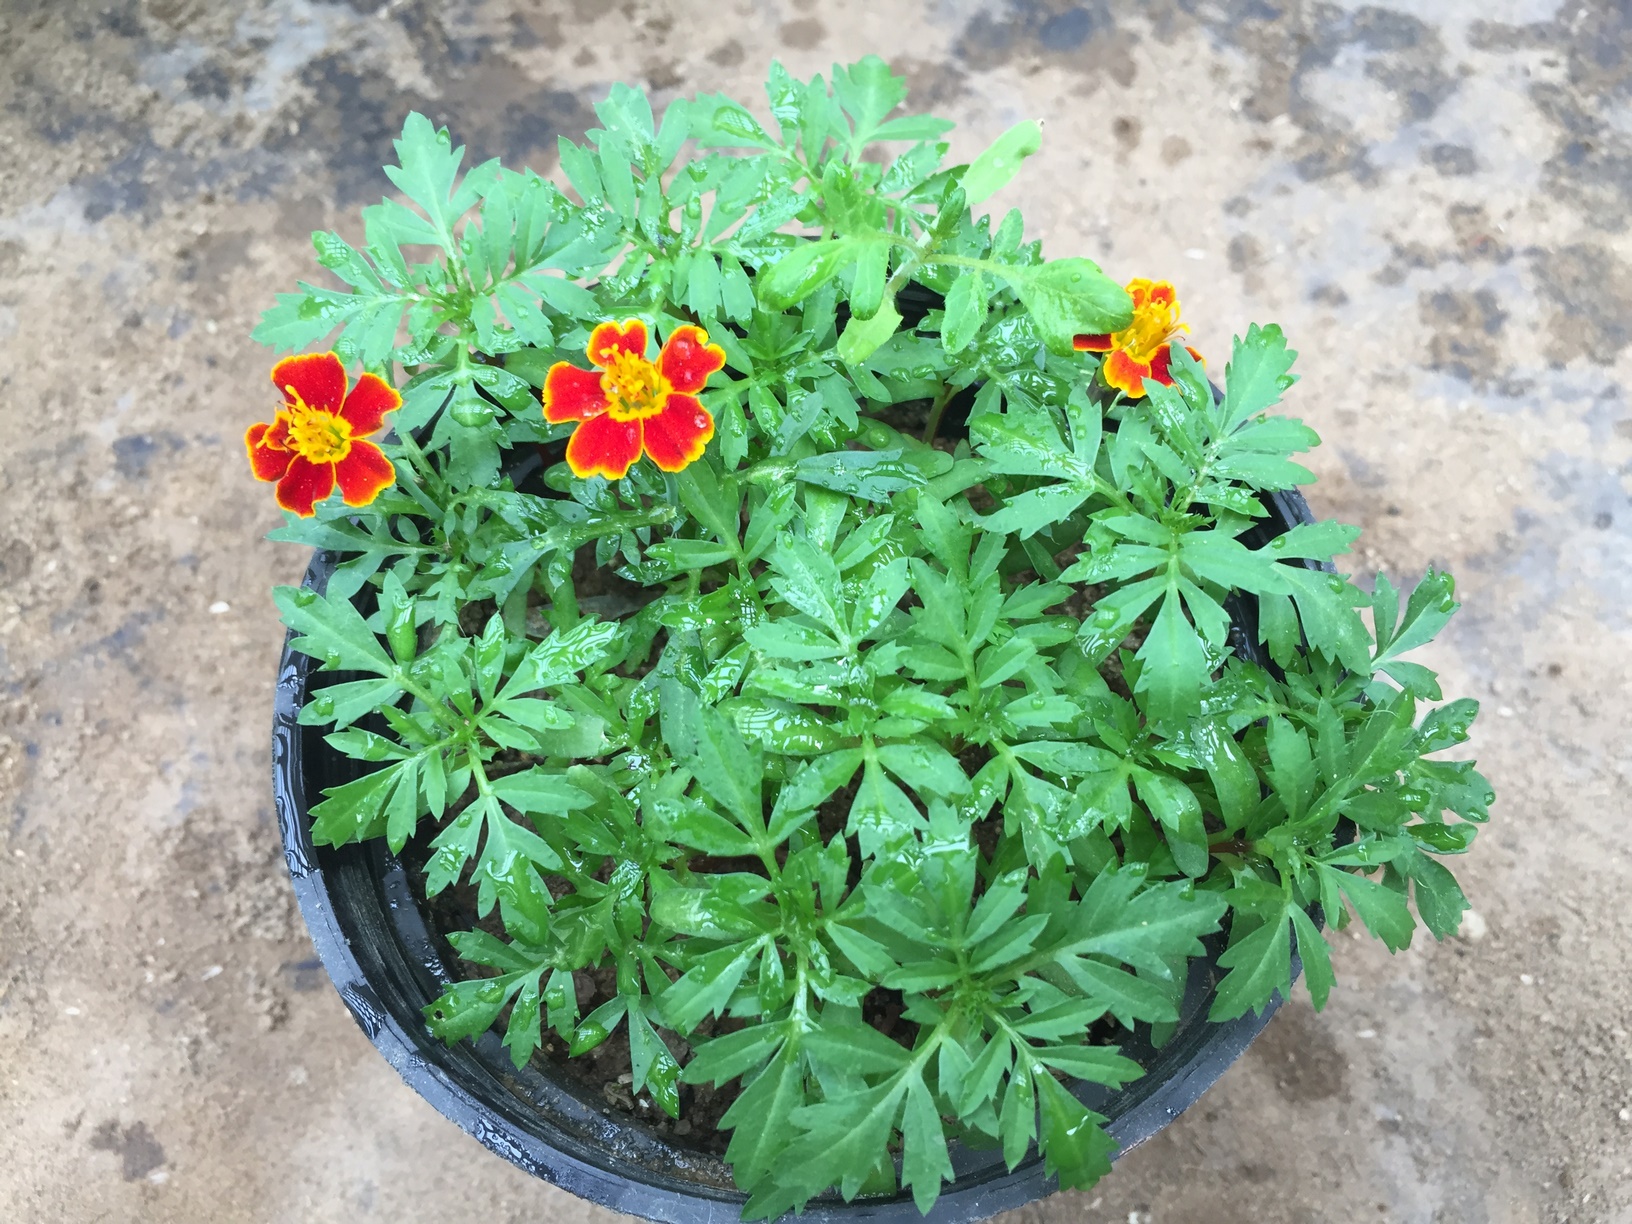 Marigolds germinate quickly, grow rapidly and blooms should appear within a few weeks of sowing.